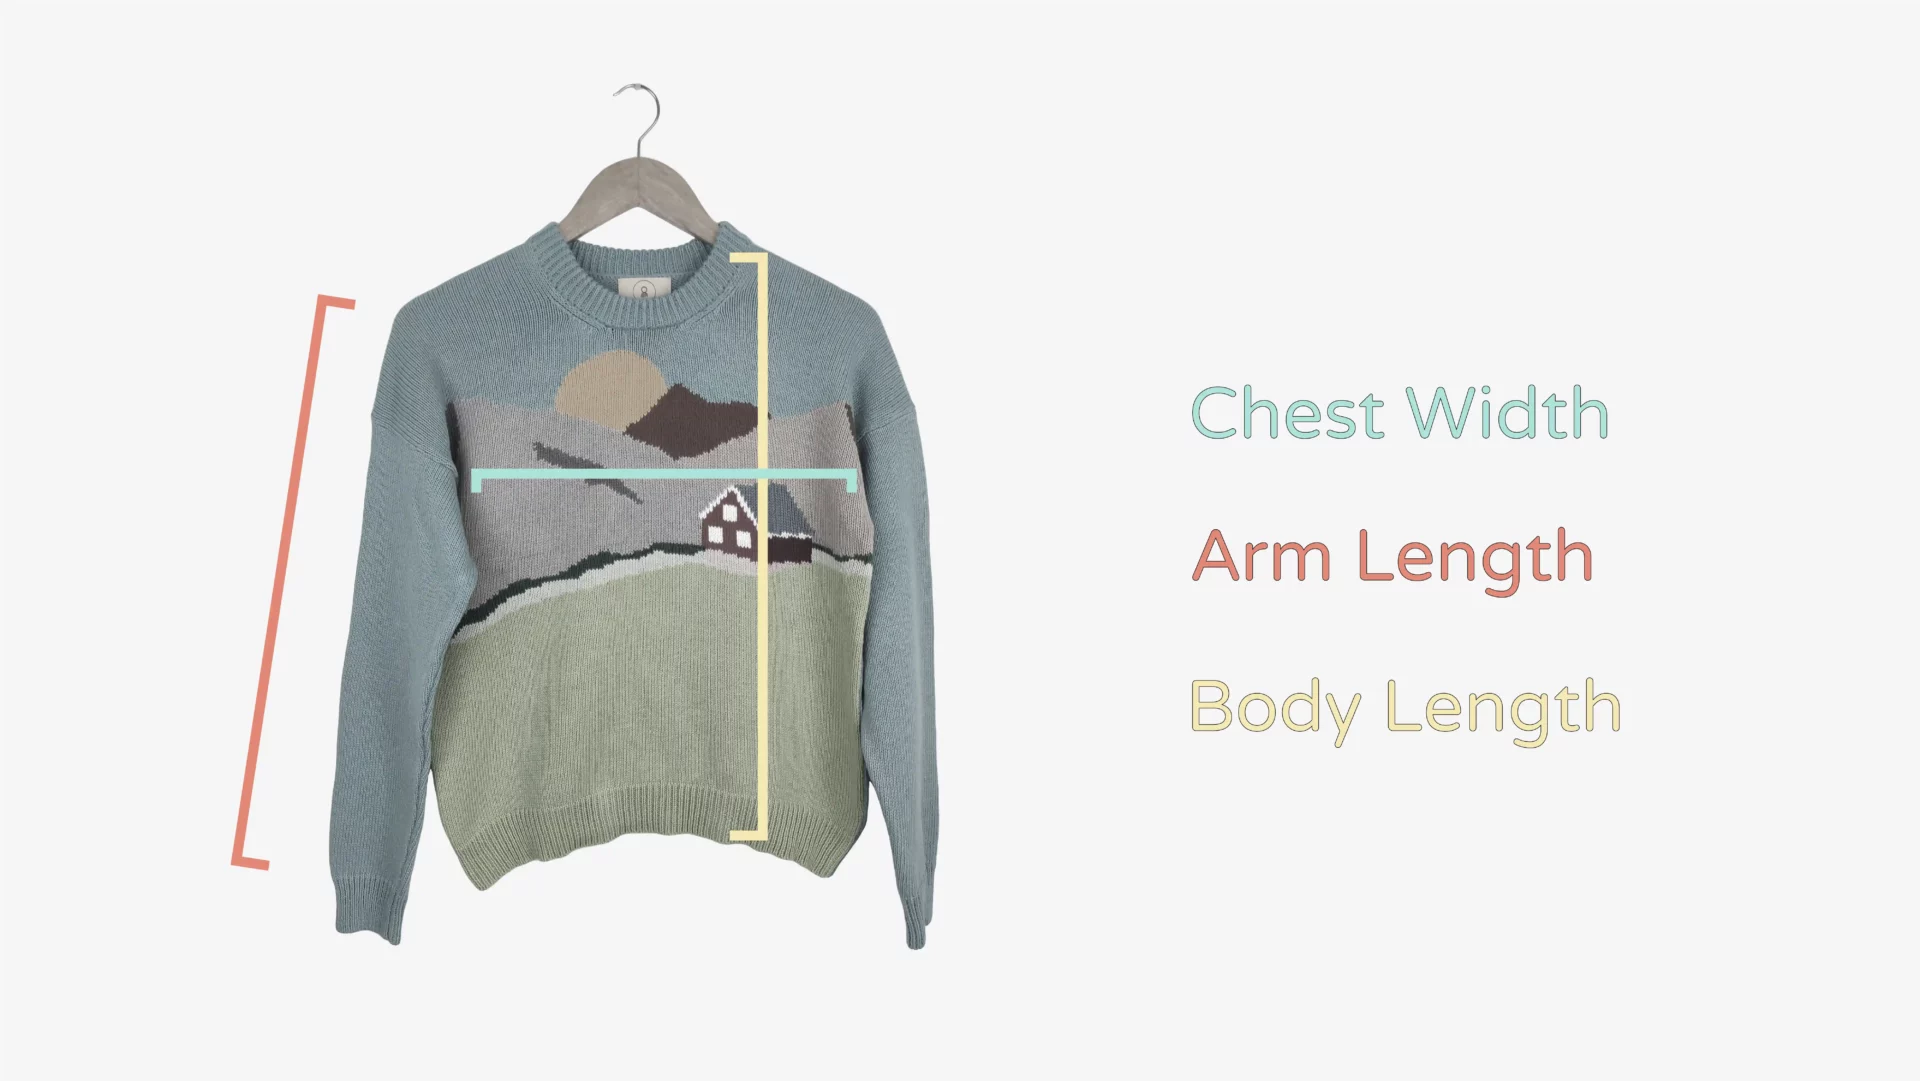 A custom size guide showing how to take measurements for a custom sized product. Chest width, arm length and body length are displayed.